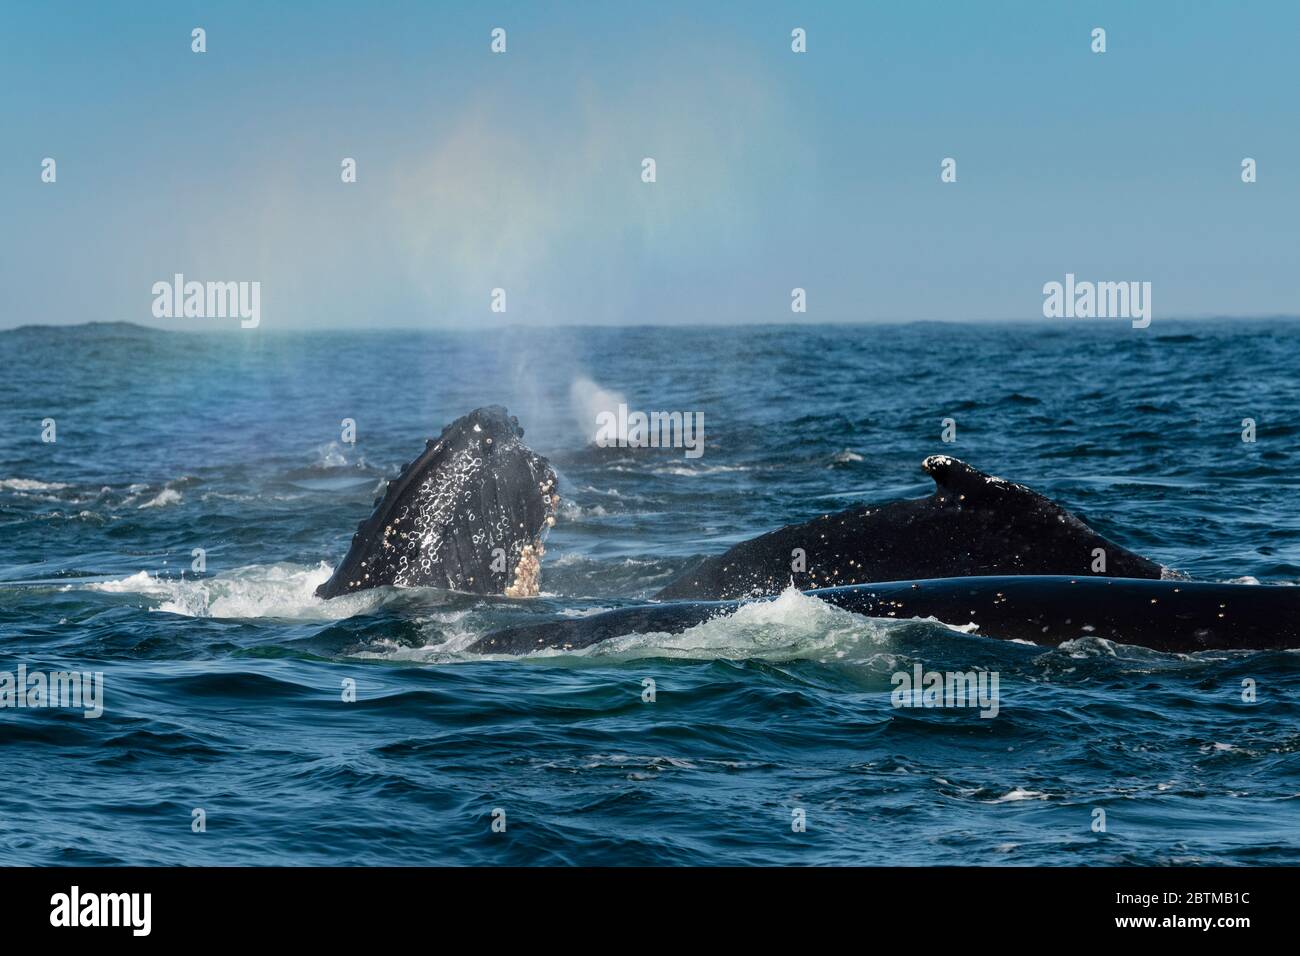 Humpback whale feeding on plankton brought in by the Benguela Current, Atlantic Ocean, South Africa. Stock Photo